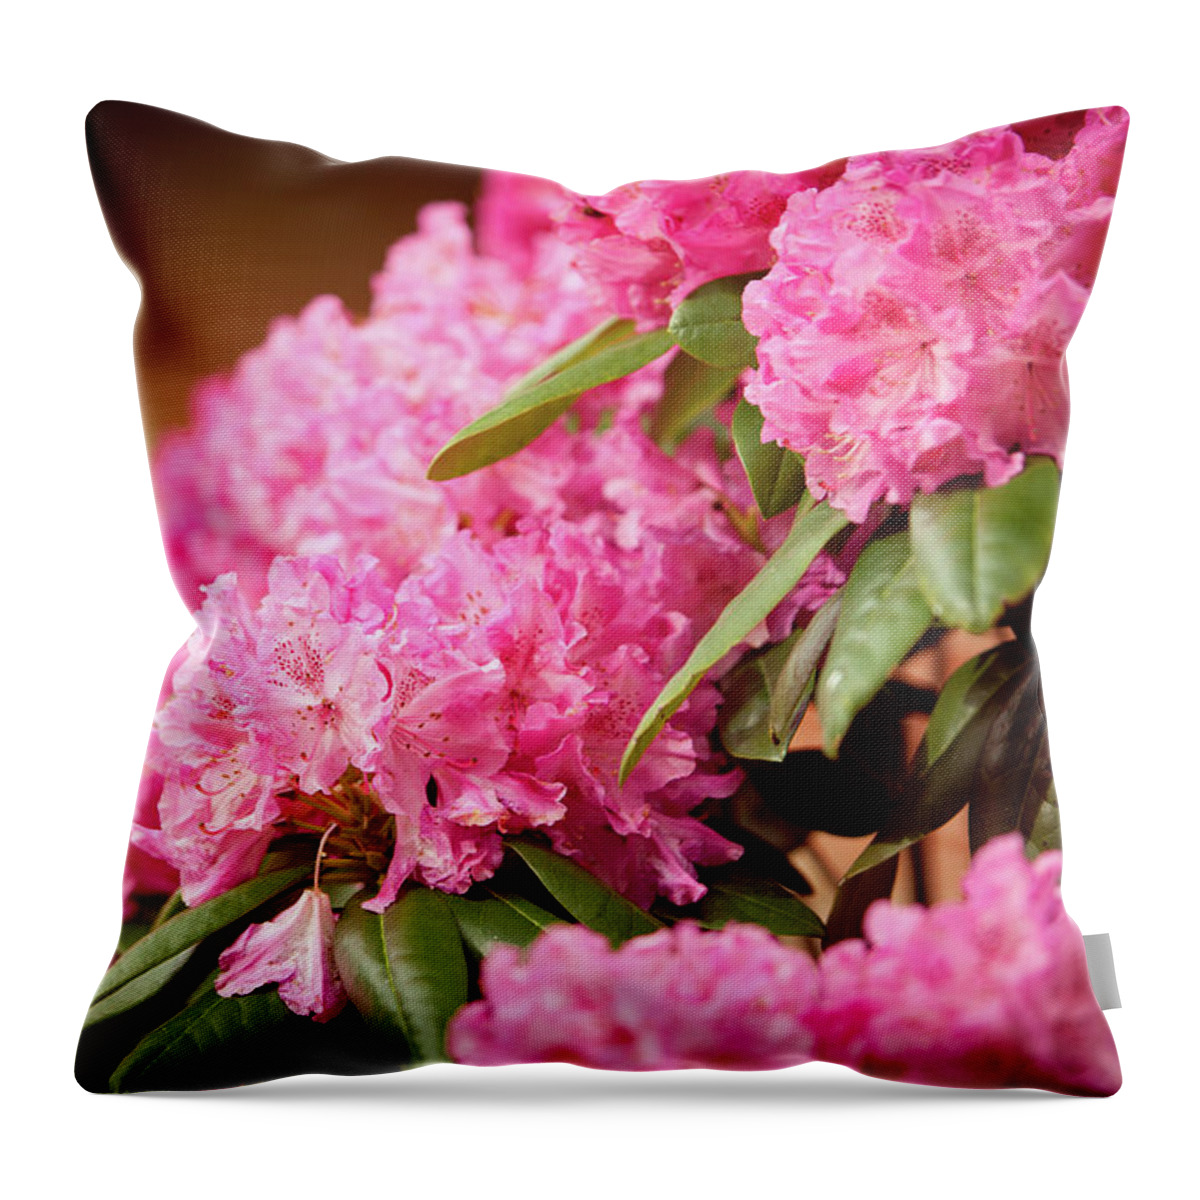 Flowers Throw Pillow featuring the photograph Pink Flower Clusters by Rich S